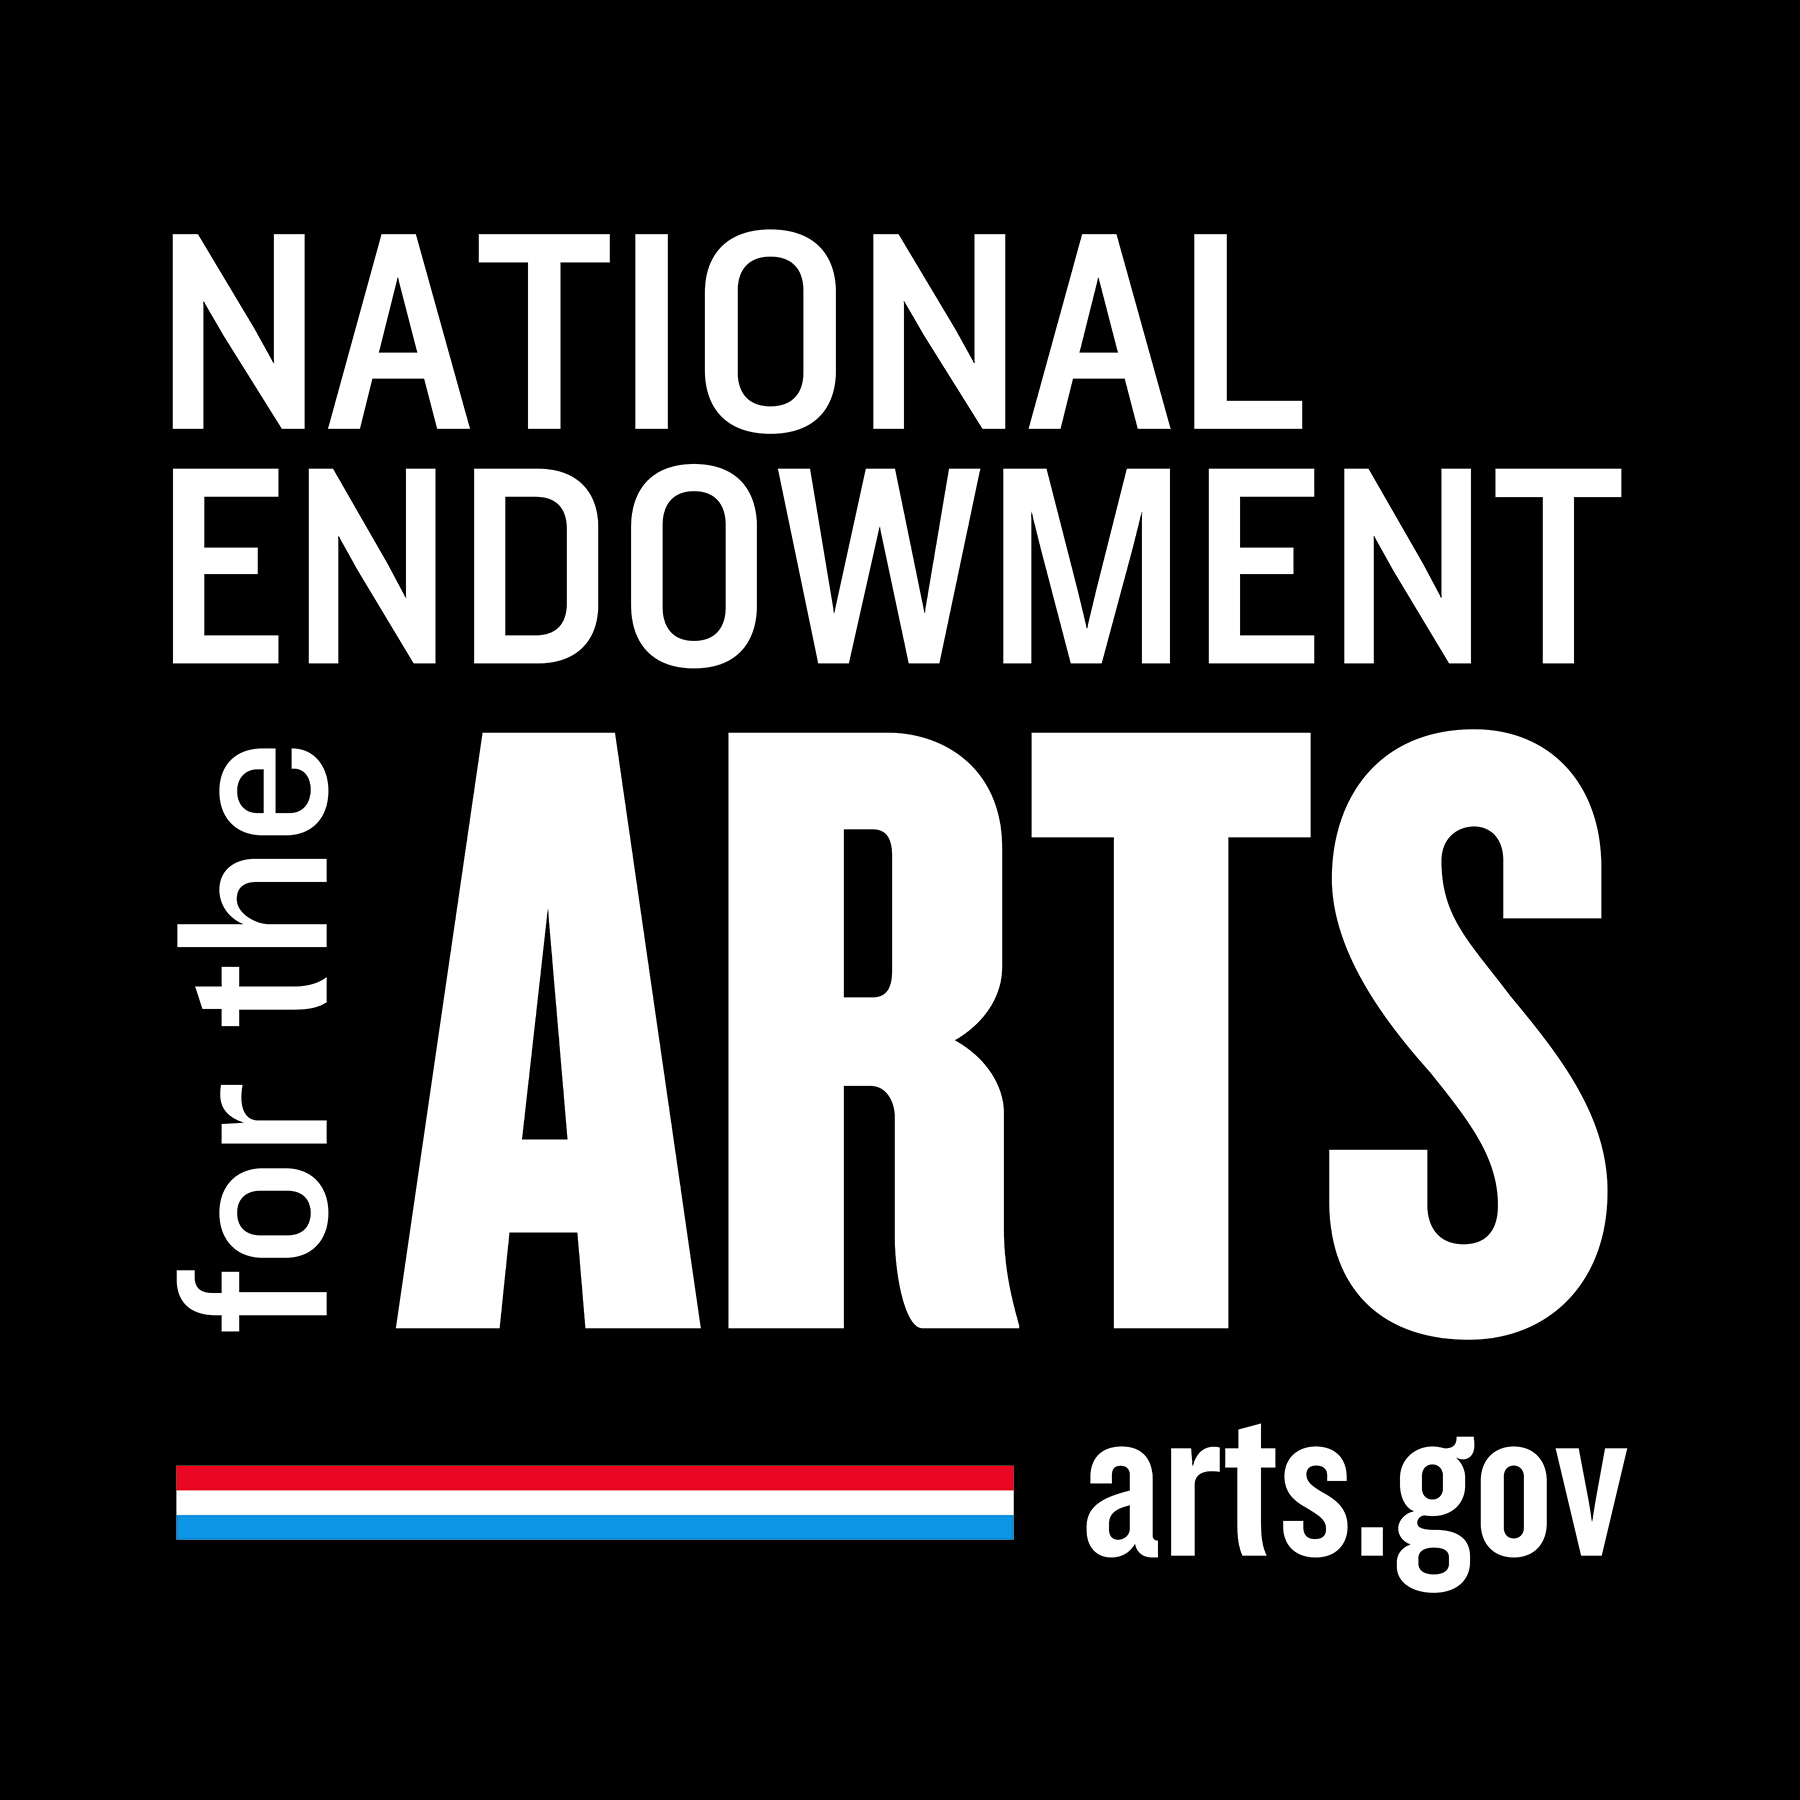 ArtsFairfax Receives $55,000 Grant from the National Endowment for the Arts